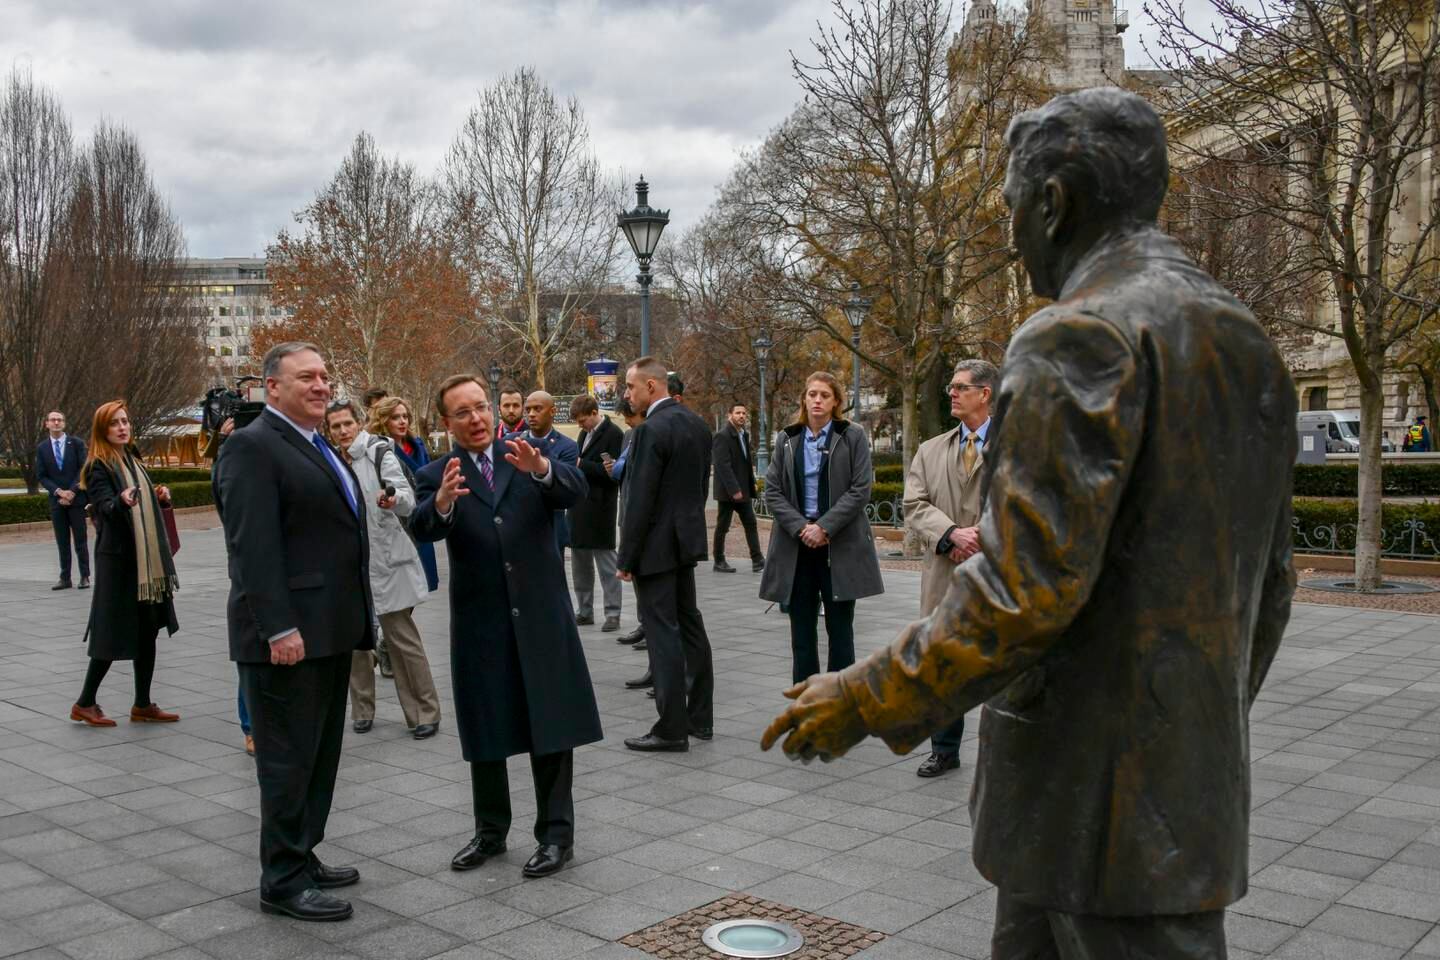 U.S. Secretary of State Michael R. Pompeo visits the Ronald Reagan Statue in Budapest, Hungary on February 11, 2019.[State Department photo by Ron Przysucha/ Public Domain]